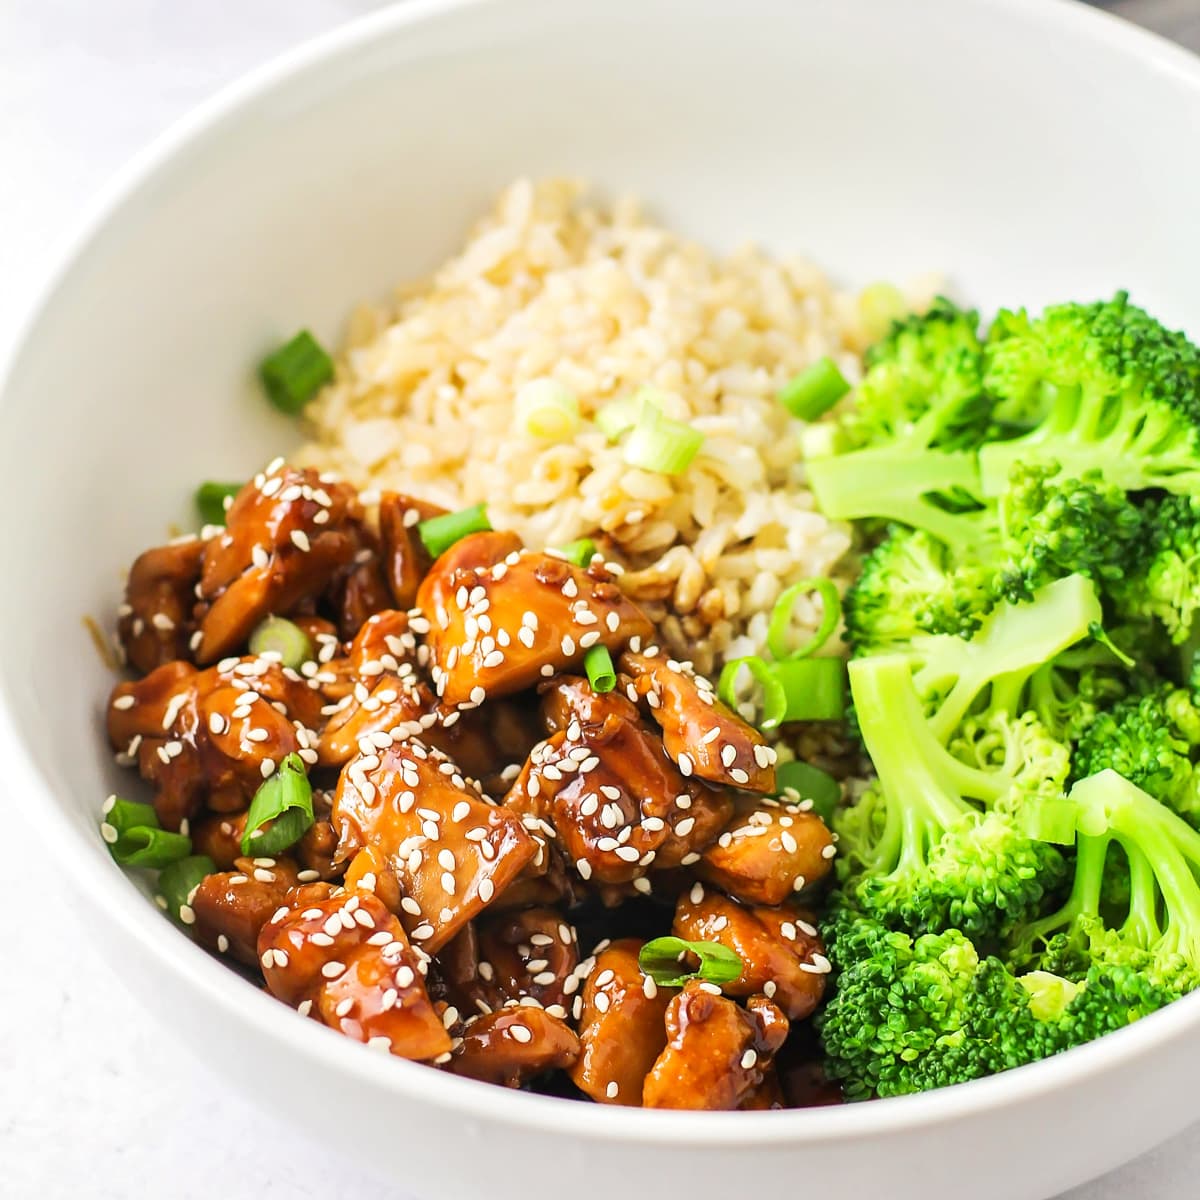 Teriyaki sauce coating chicken in a white bowl served with rice and broccoli.